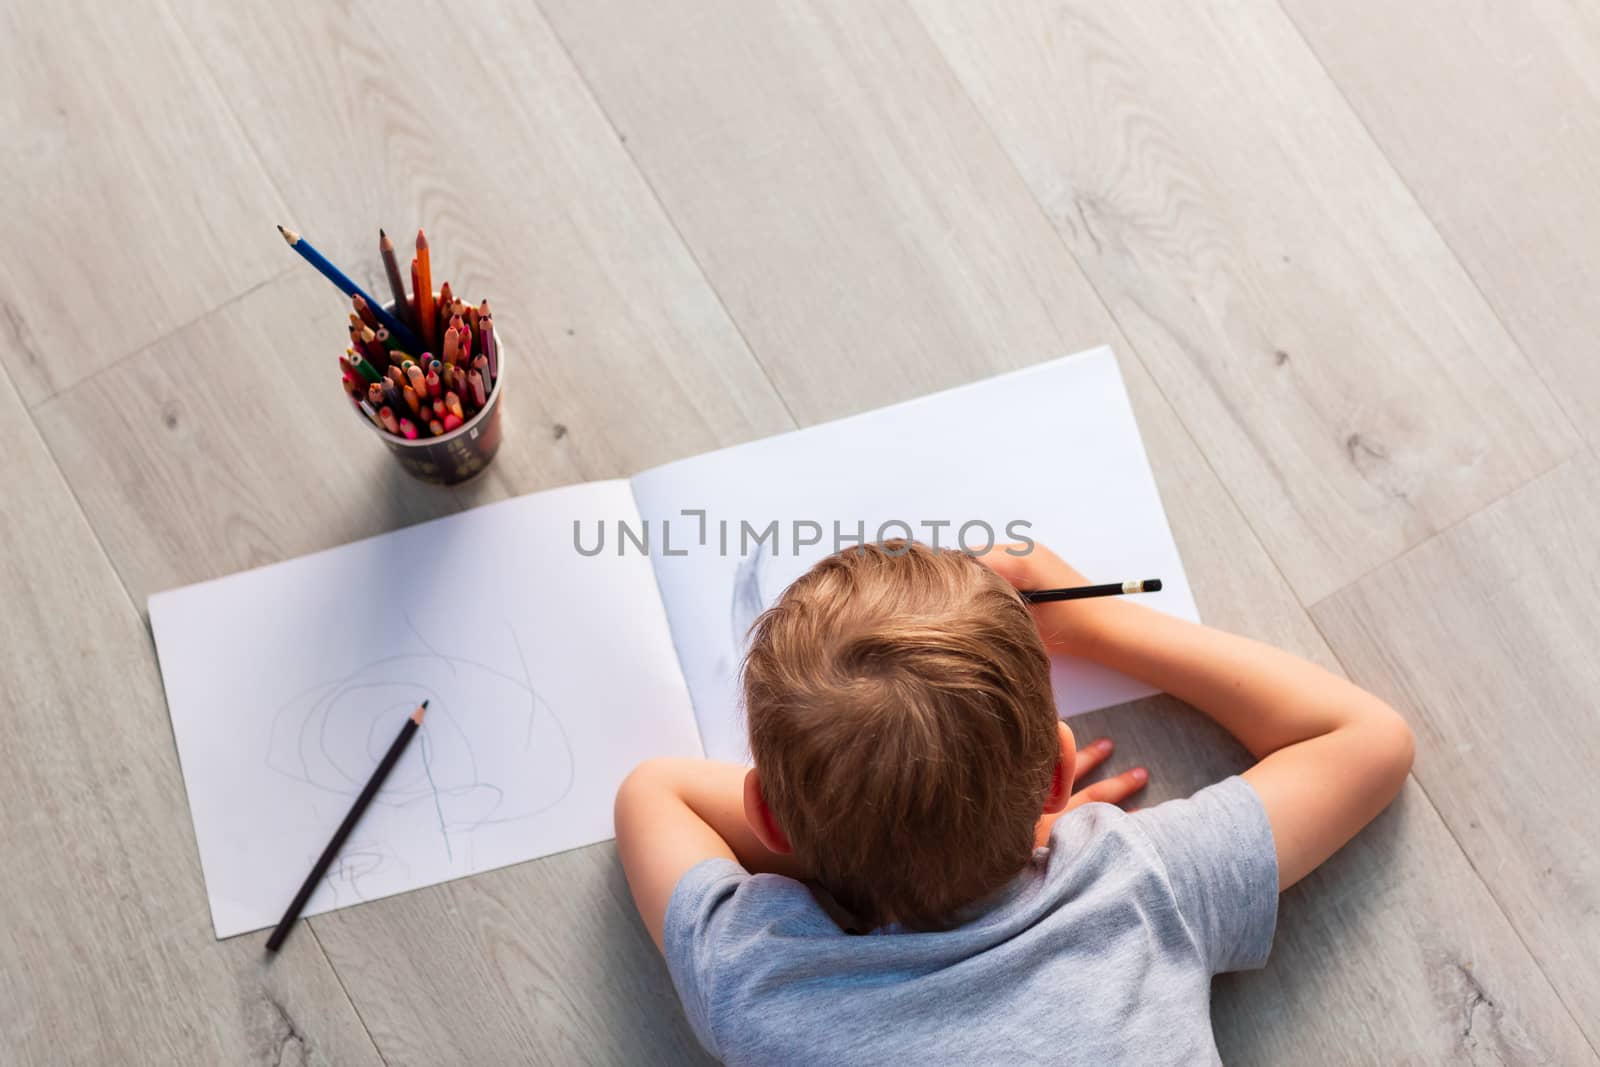 Little boy drawing with pencils on the floor in his room. Stay at home during covid 19 quarantine